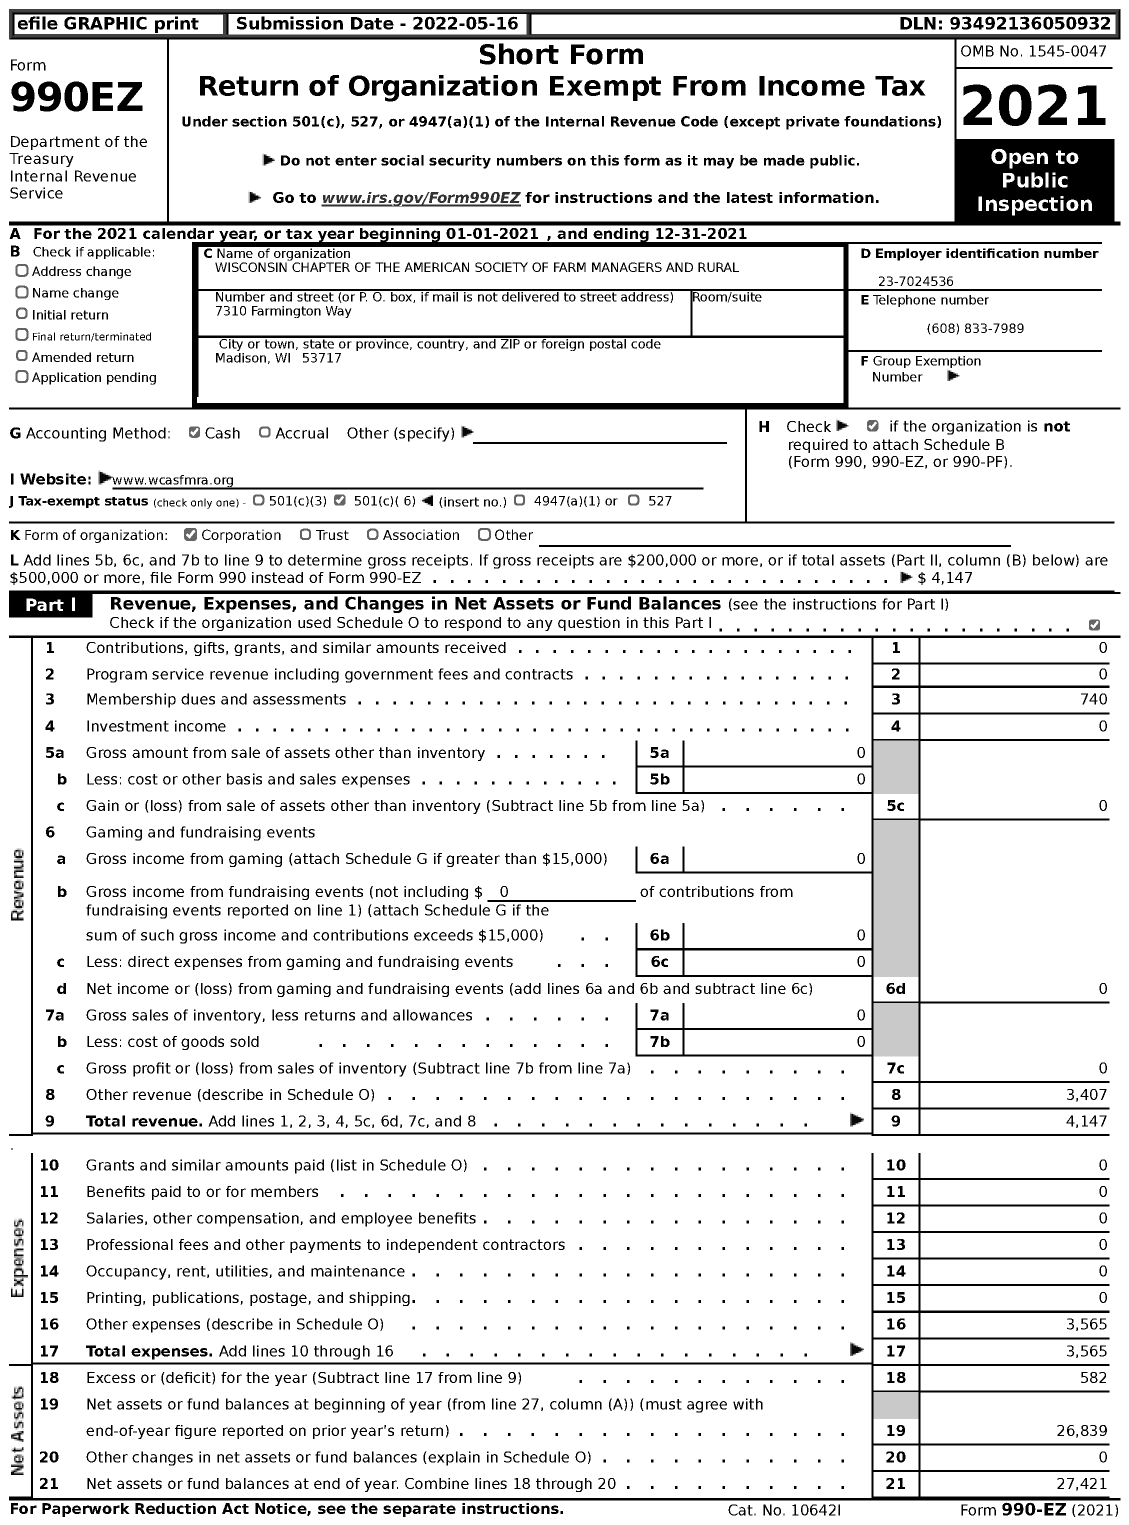 Image of first page of 2021 Form 990EZ for Wisconsin Chapter of the American Society of Farm Managers and Rural